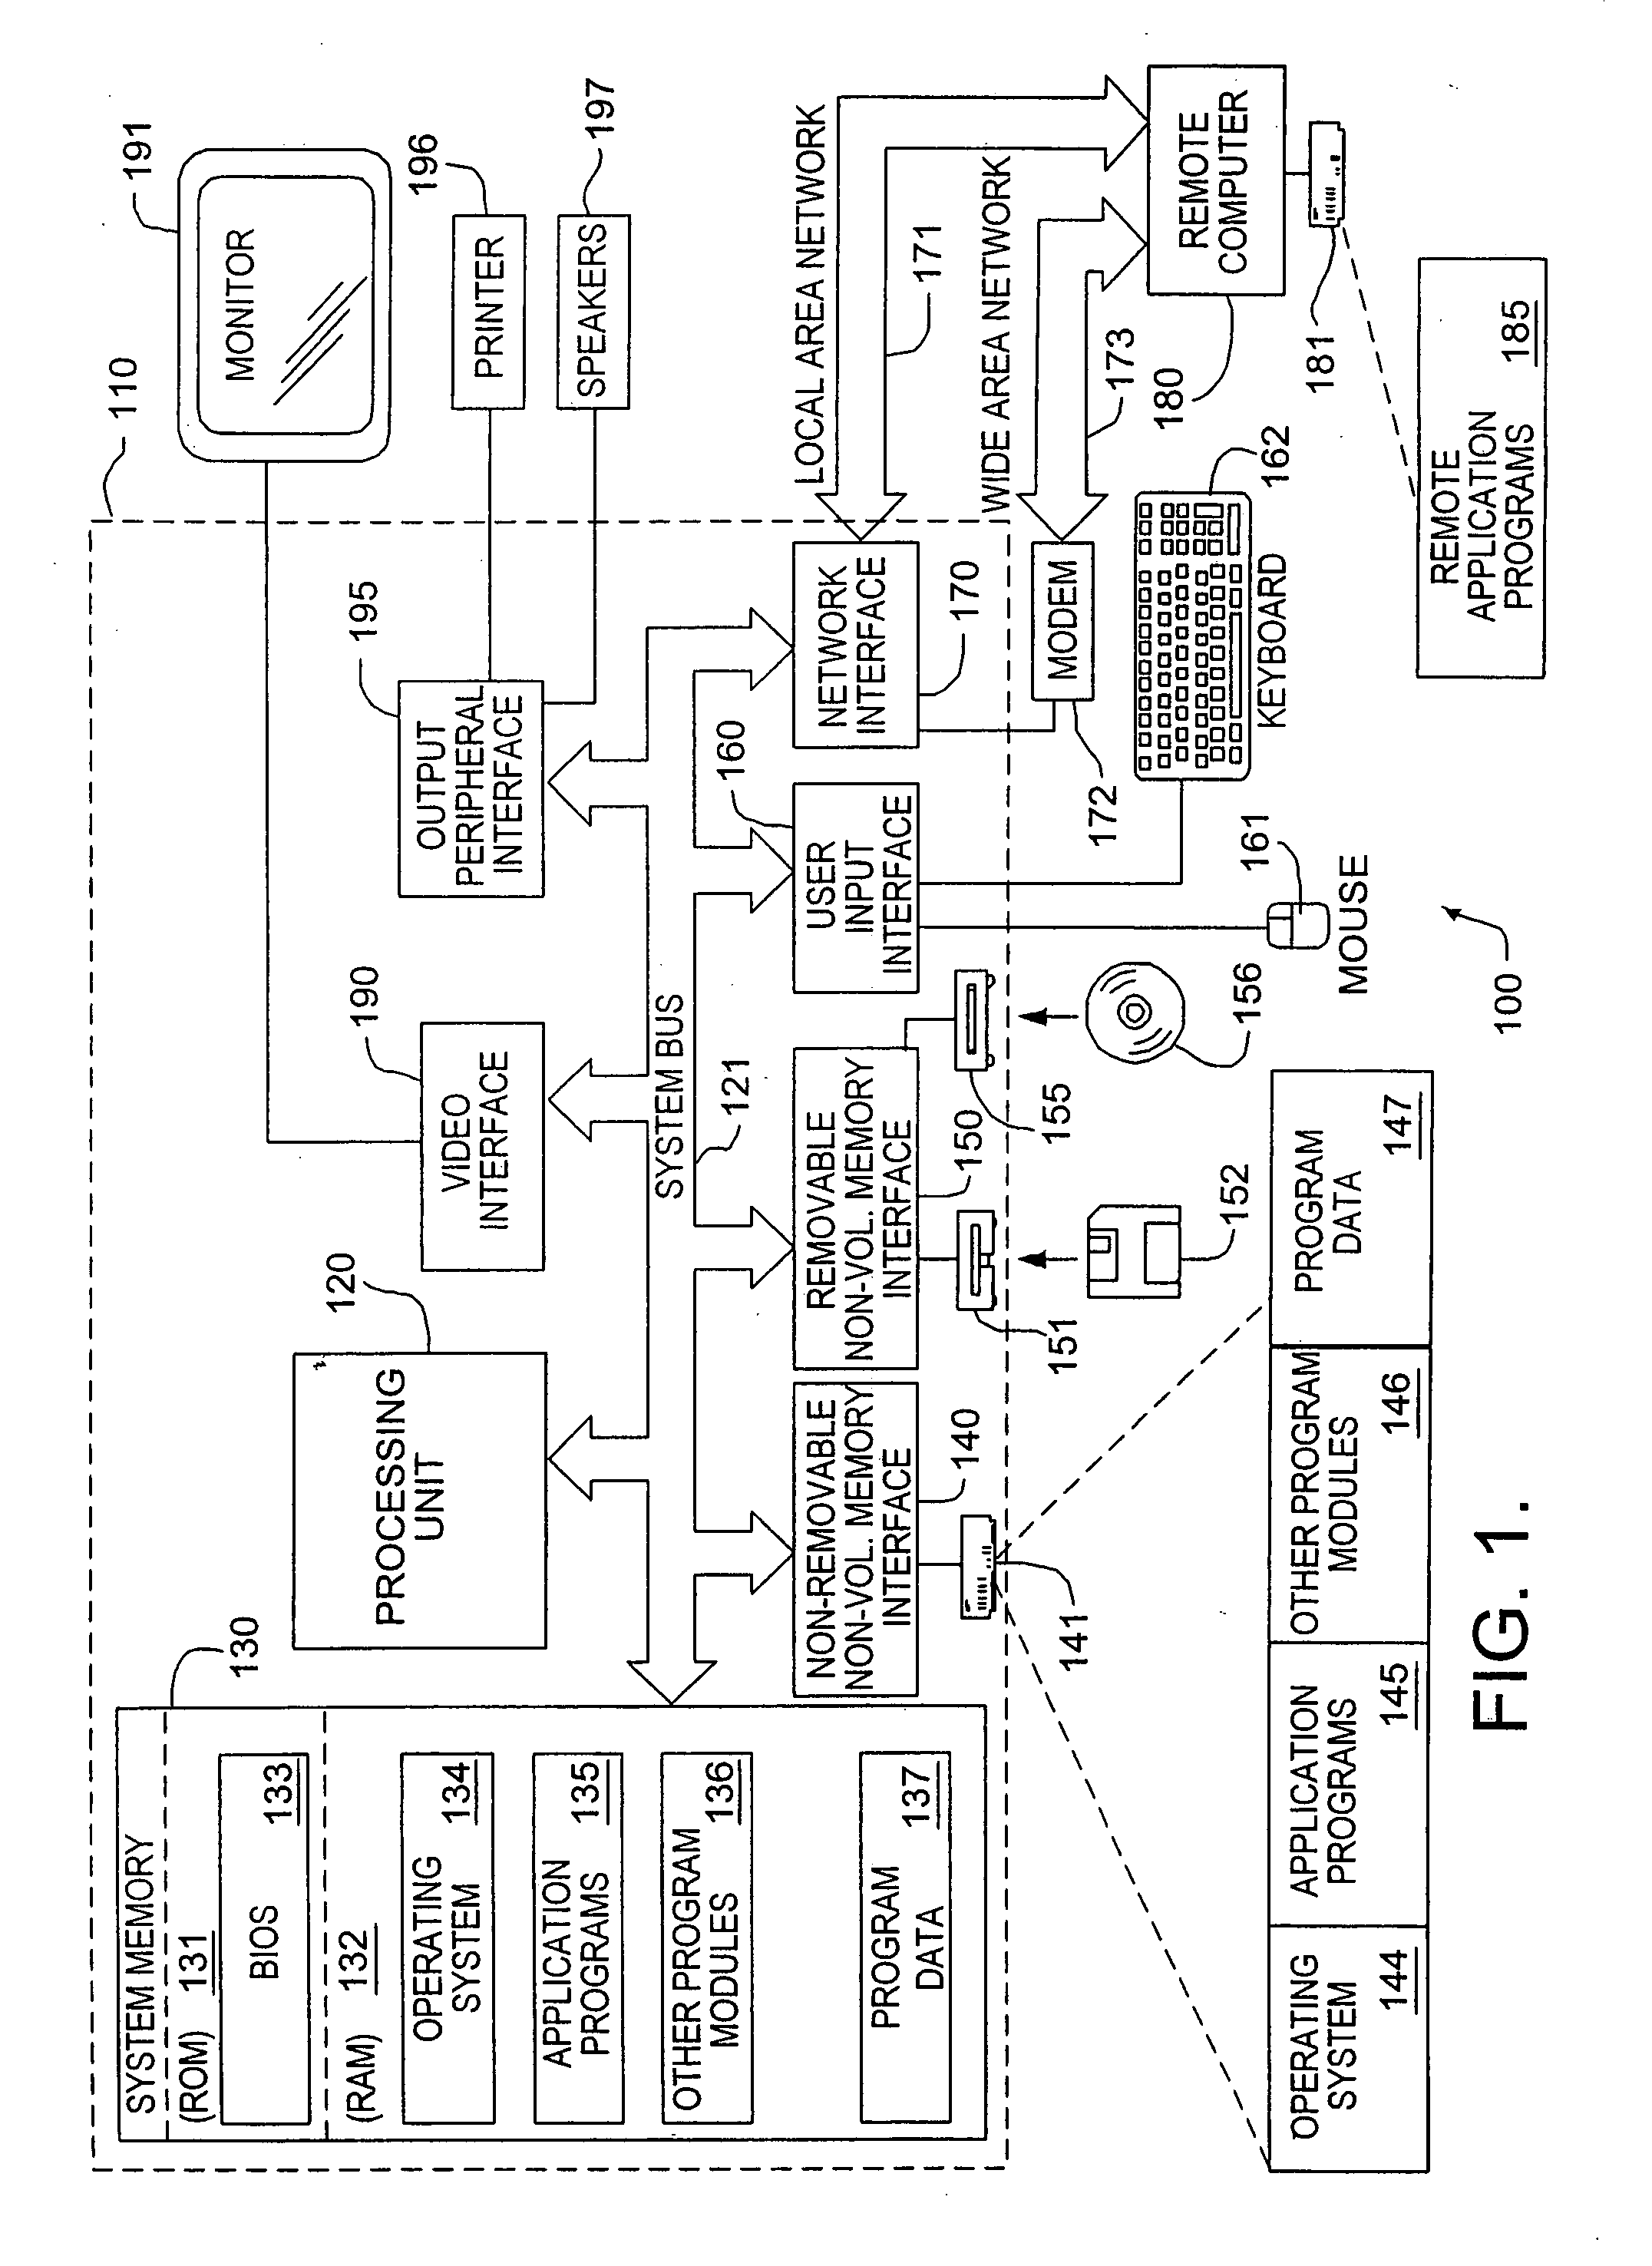 System and method for providing dynamic user information in an interactive display